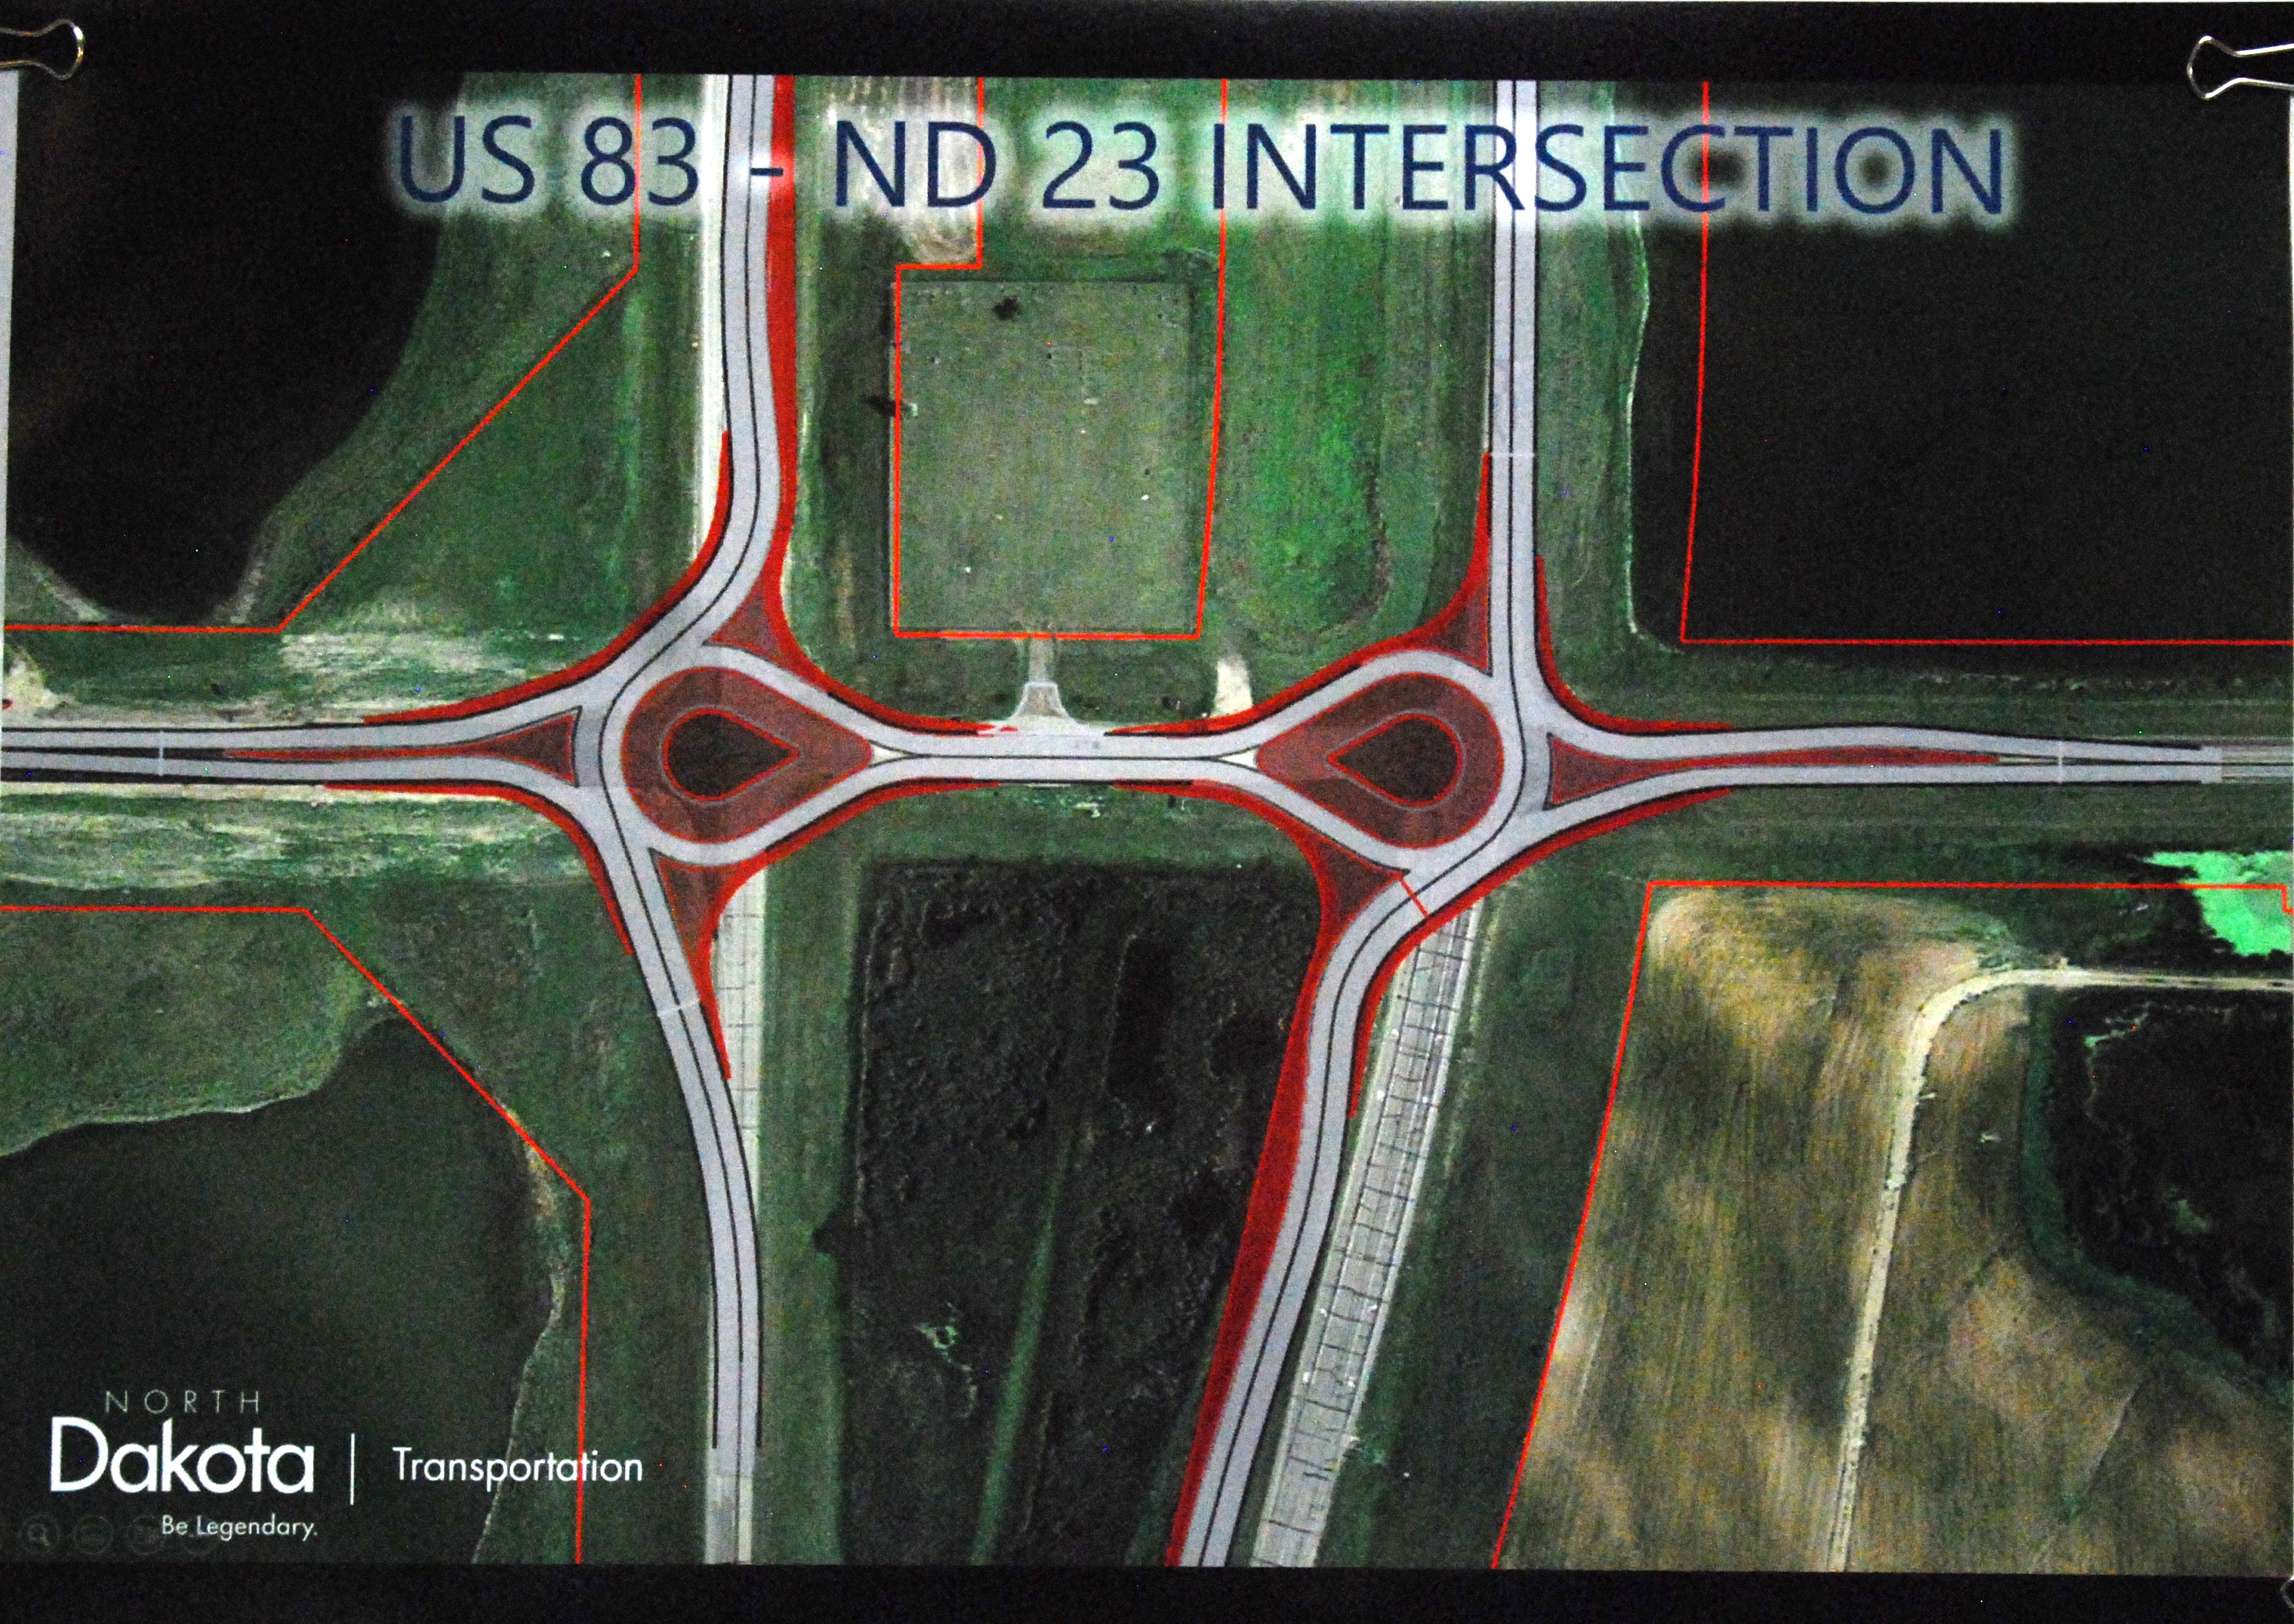 NDDOT takes on dangerous intersection near Max